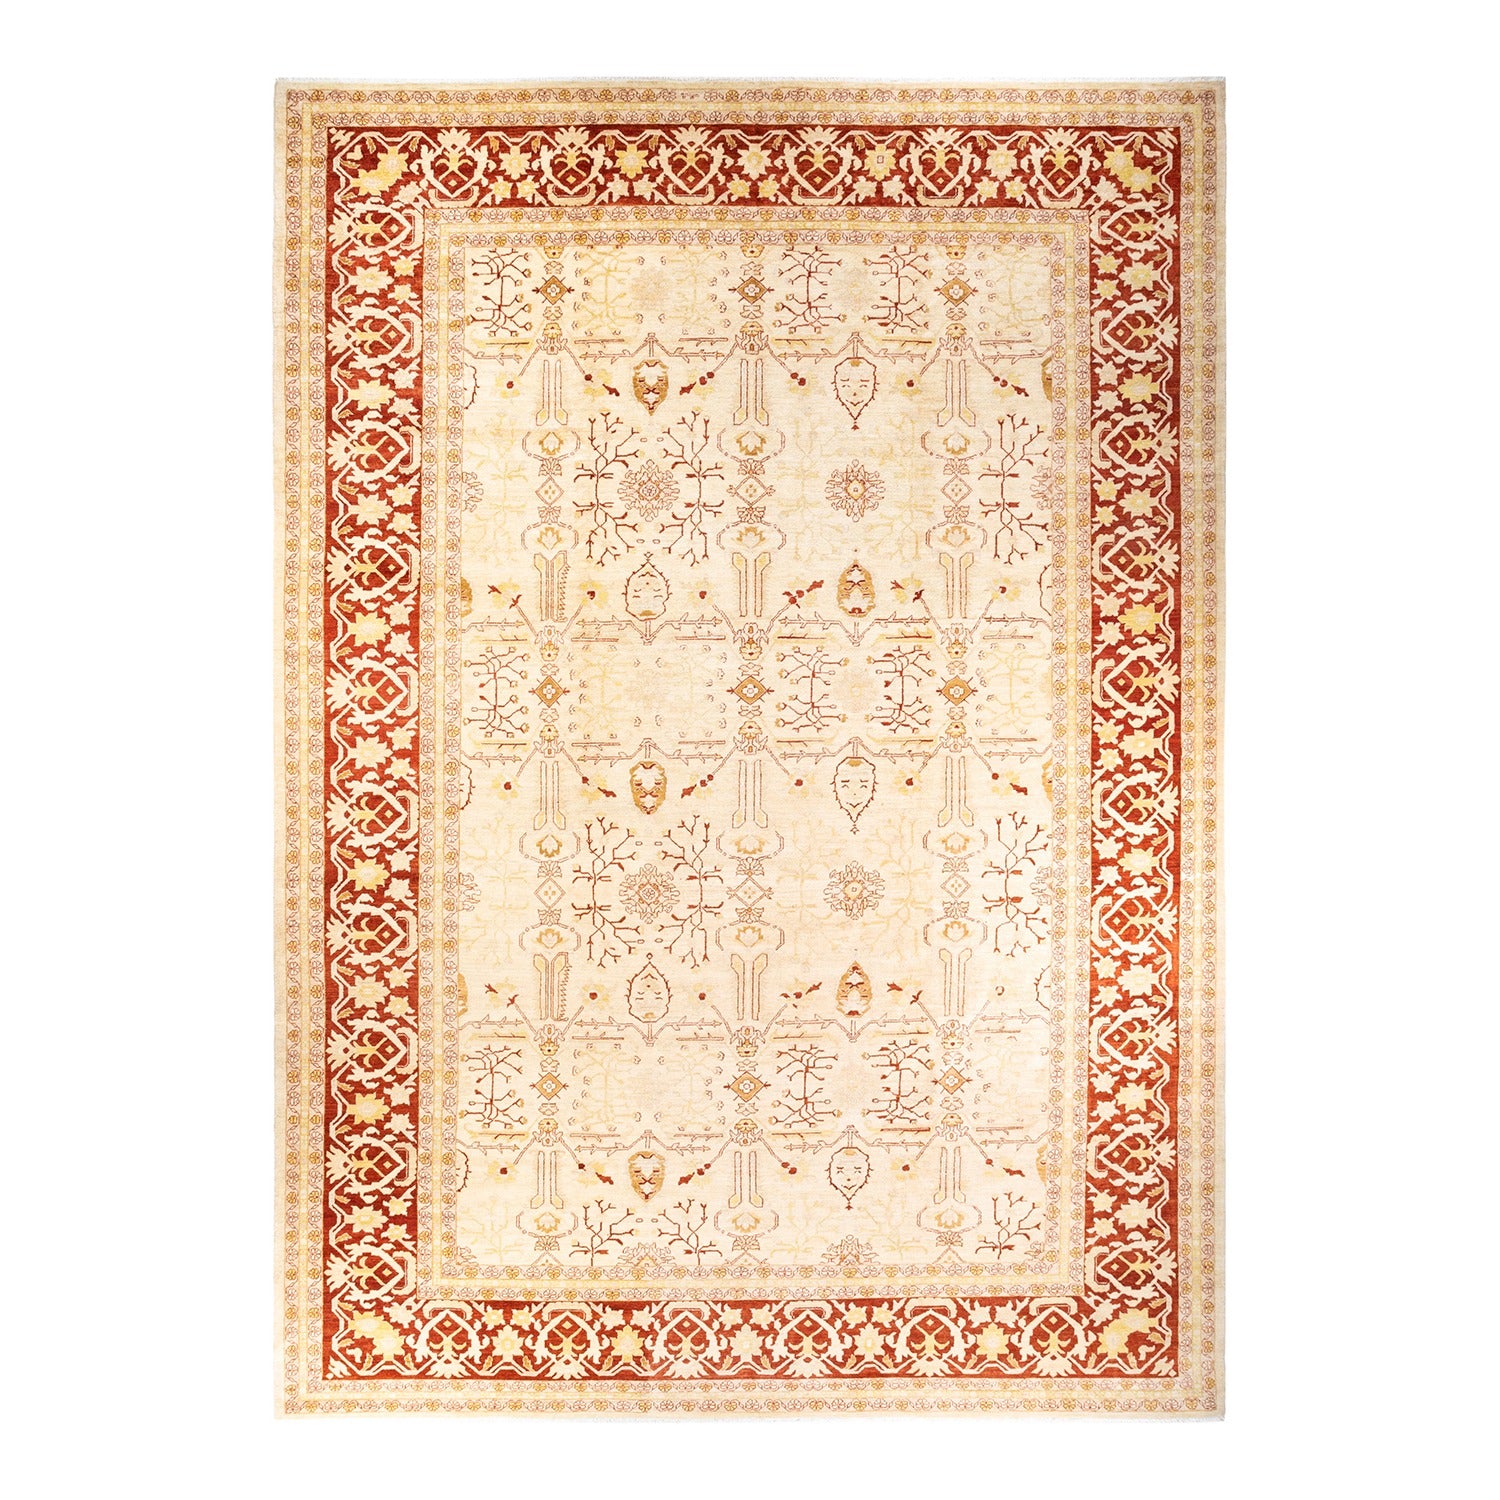 Intricately patterned traditional-style area rug with symmetrical motifs and elegant design.